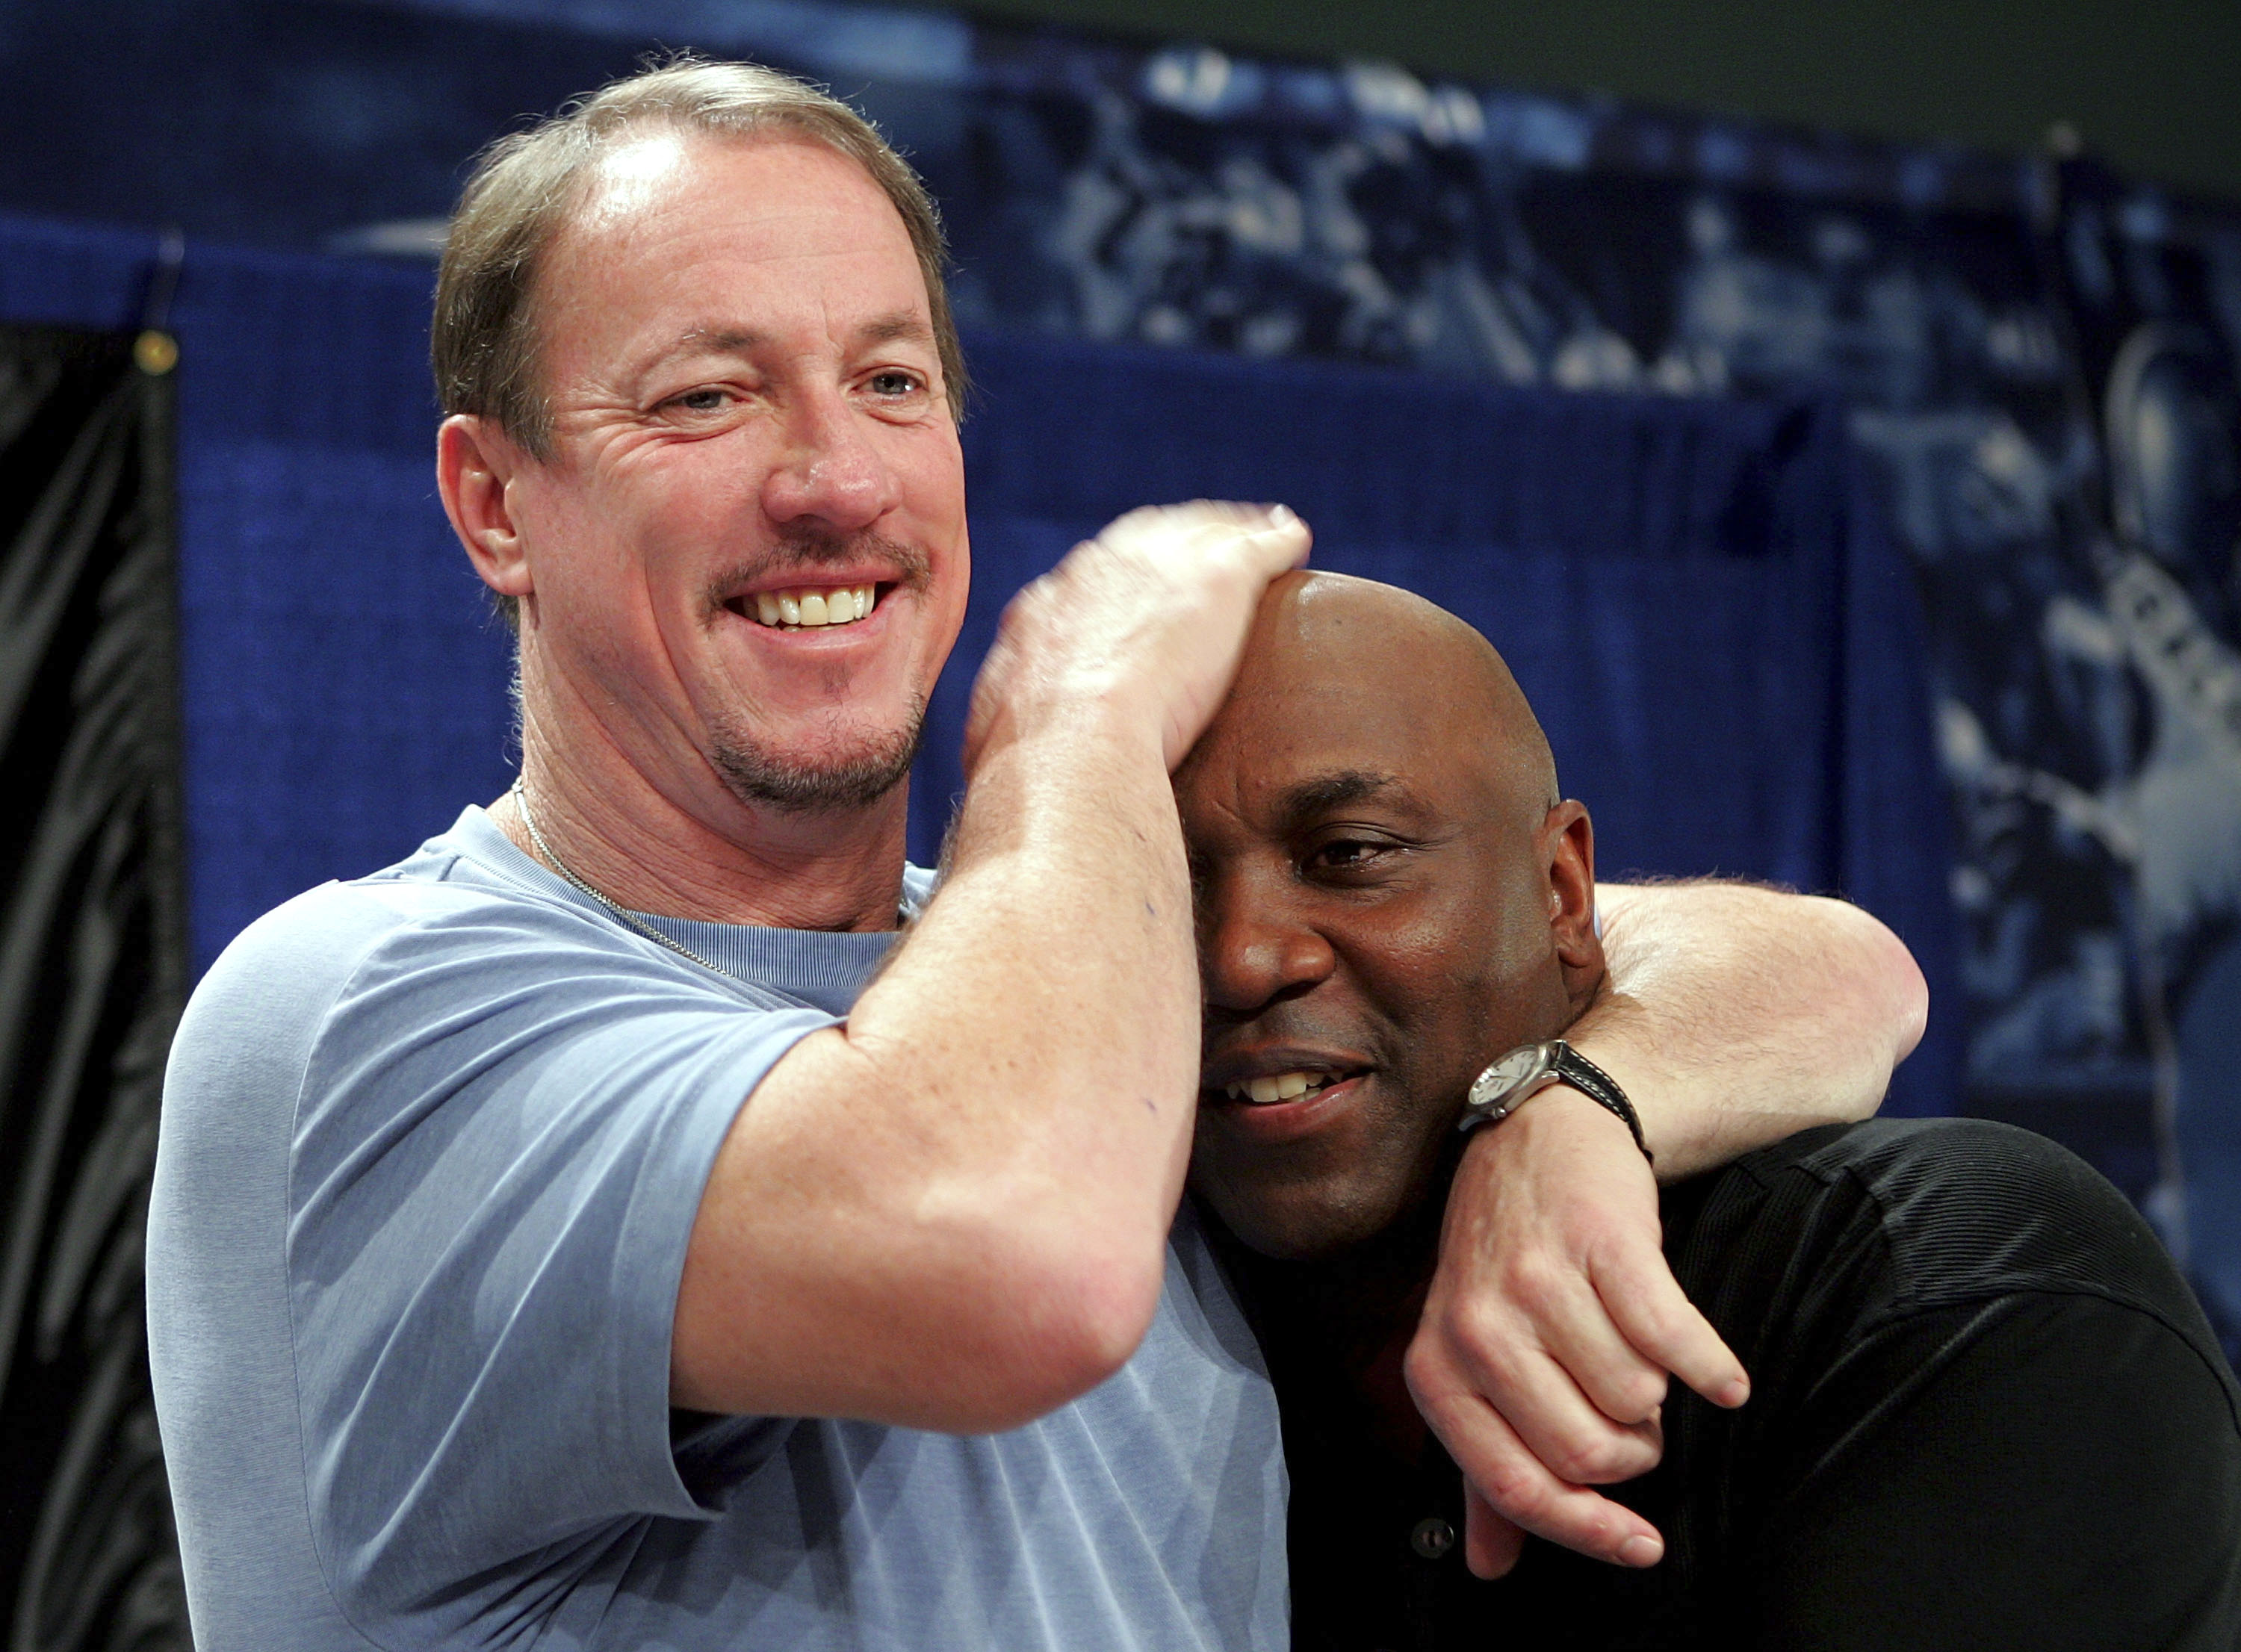 MIAMI - FEBRUARY 03:  (L-R) Former player Jim Kelly congratulates former teammate Hall of Fame inductee Thurman Thomas formerly of the Buffalo Bills during the Super Bowl XLI Pro Football Hall of Fame Press Conference at the Miami Convention Center on Feb